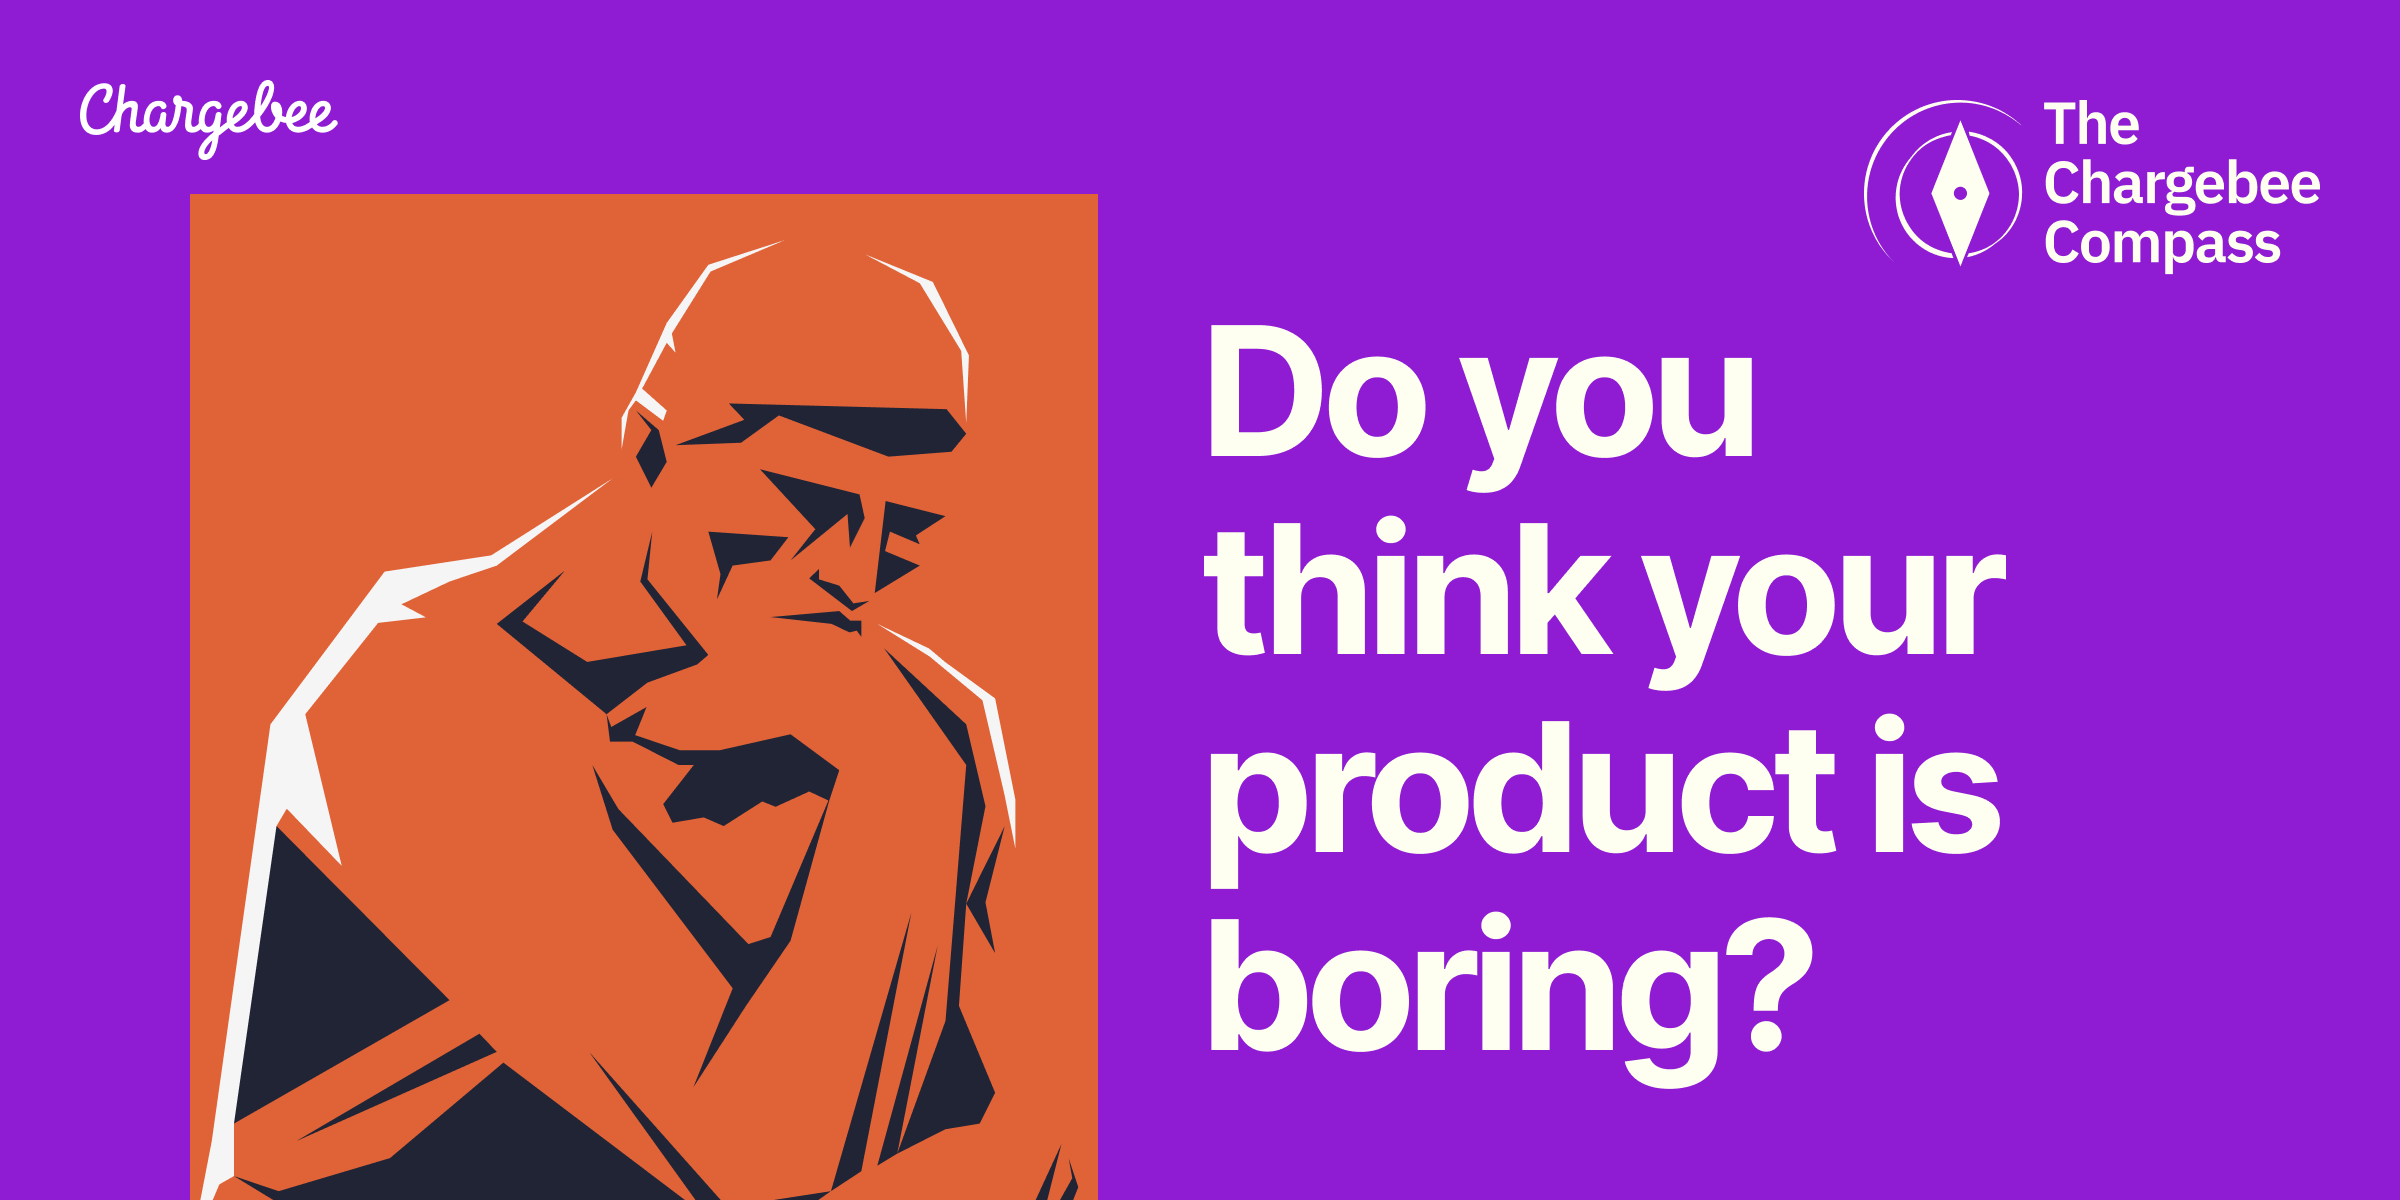 Do you think your product is boring?